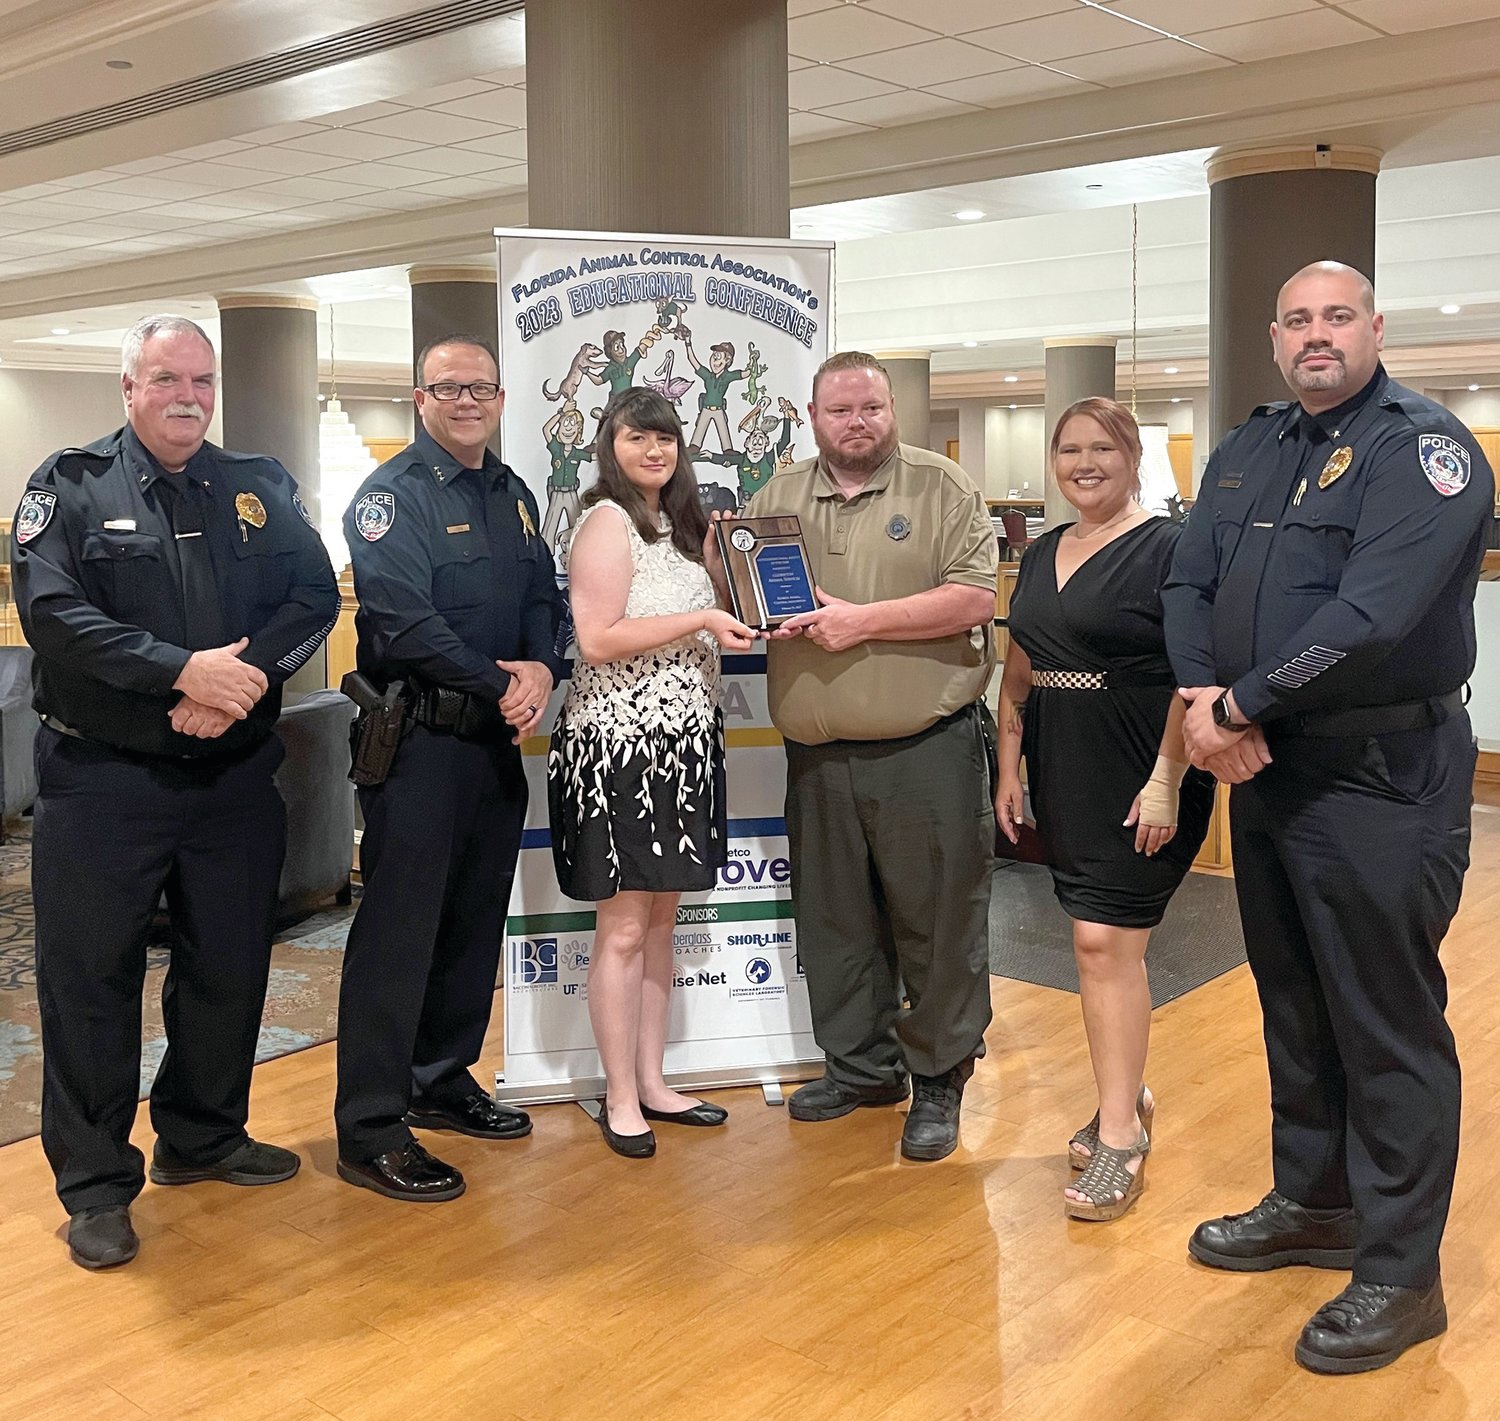 Left to right: Commander Dan Brophy, Chief Tom Lewis, Kennel Tech Abigail Colston, Animal Control Officer Will Jones, Volunteer Heather Price-Hernandez, and Commander Tito Nieves accepted the Outstanding Small Agency of the Year award for the Clewiston Animal Services.